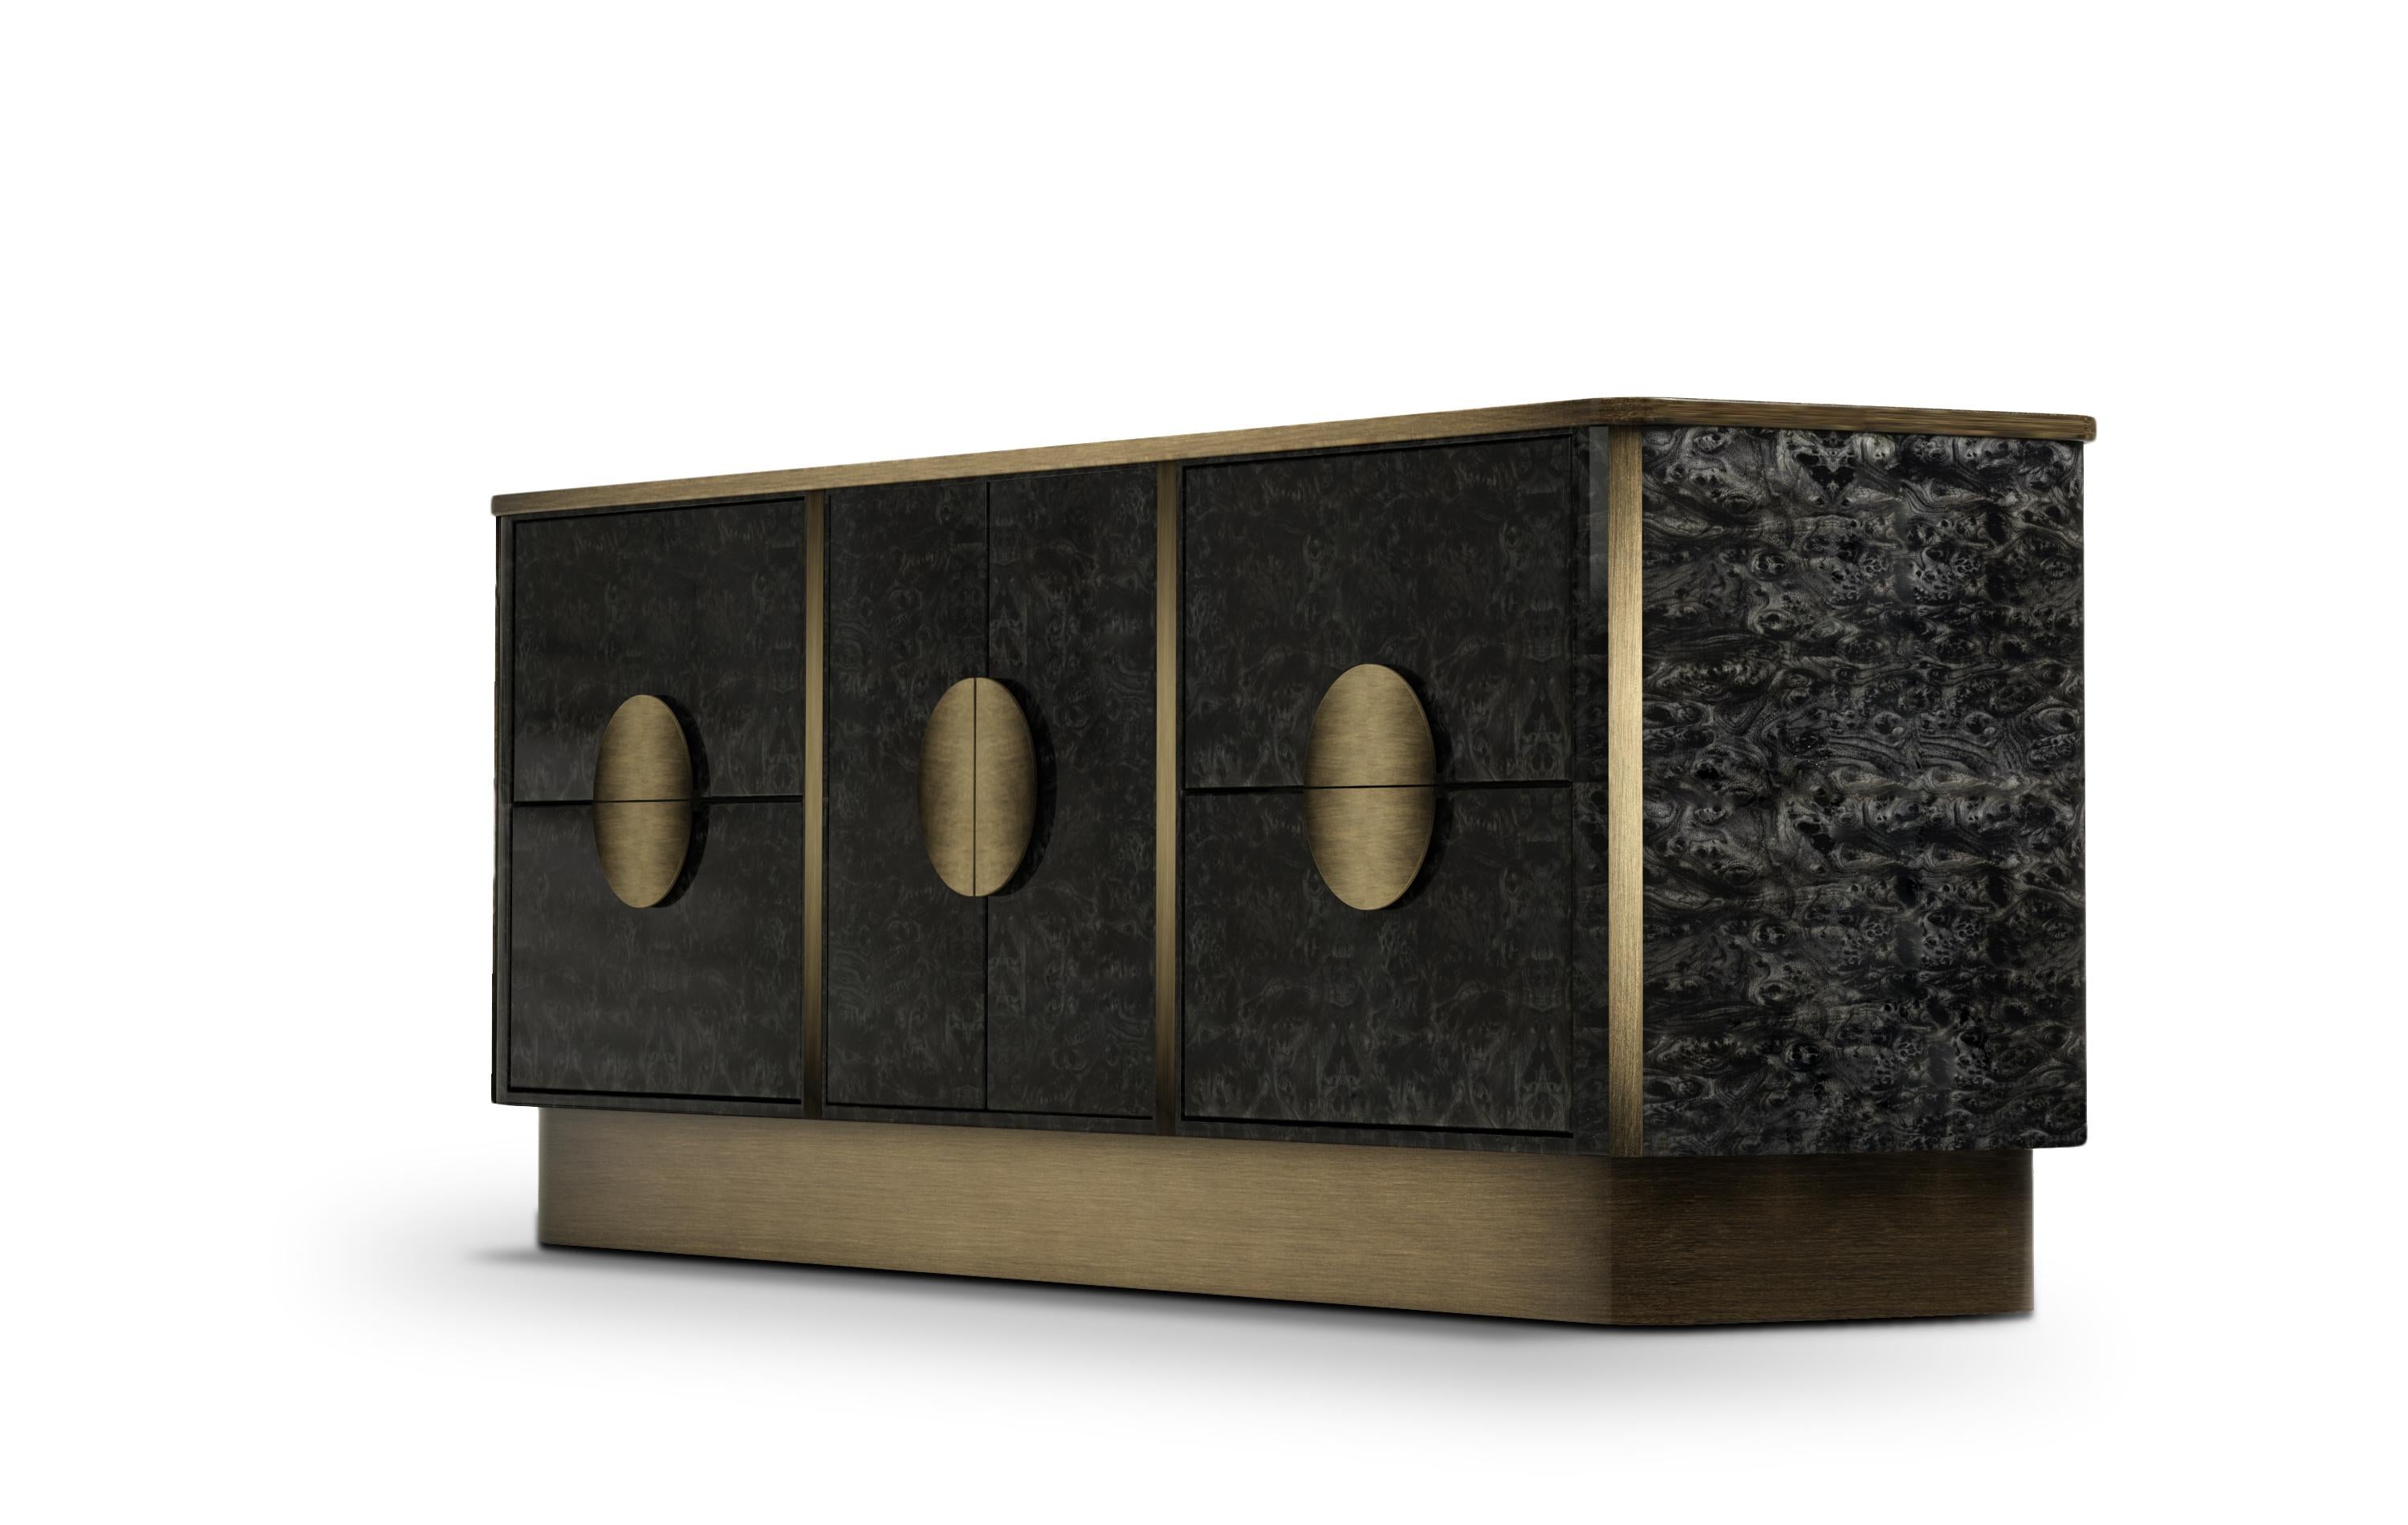 The Knox sideboard originates from one of Porus Studio’s iconic design piece, Knox contemporary nightstand. Based on the same aesthetic that created a legacy, the Knox sideboard takes exceptional craftsmanship and design to a new dimension.